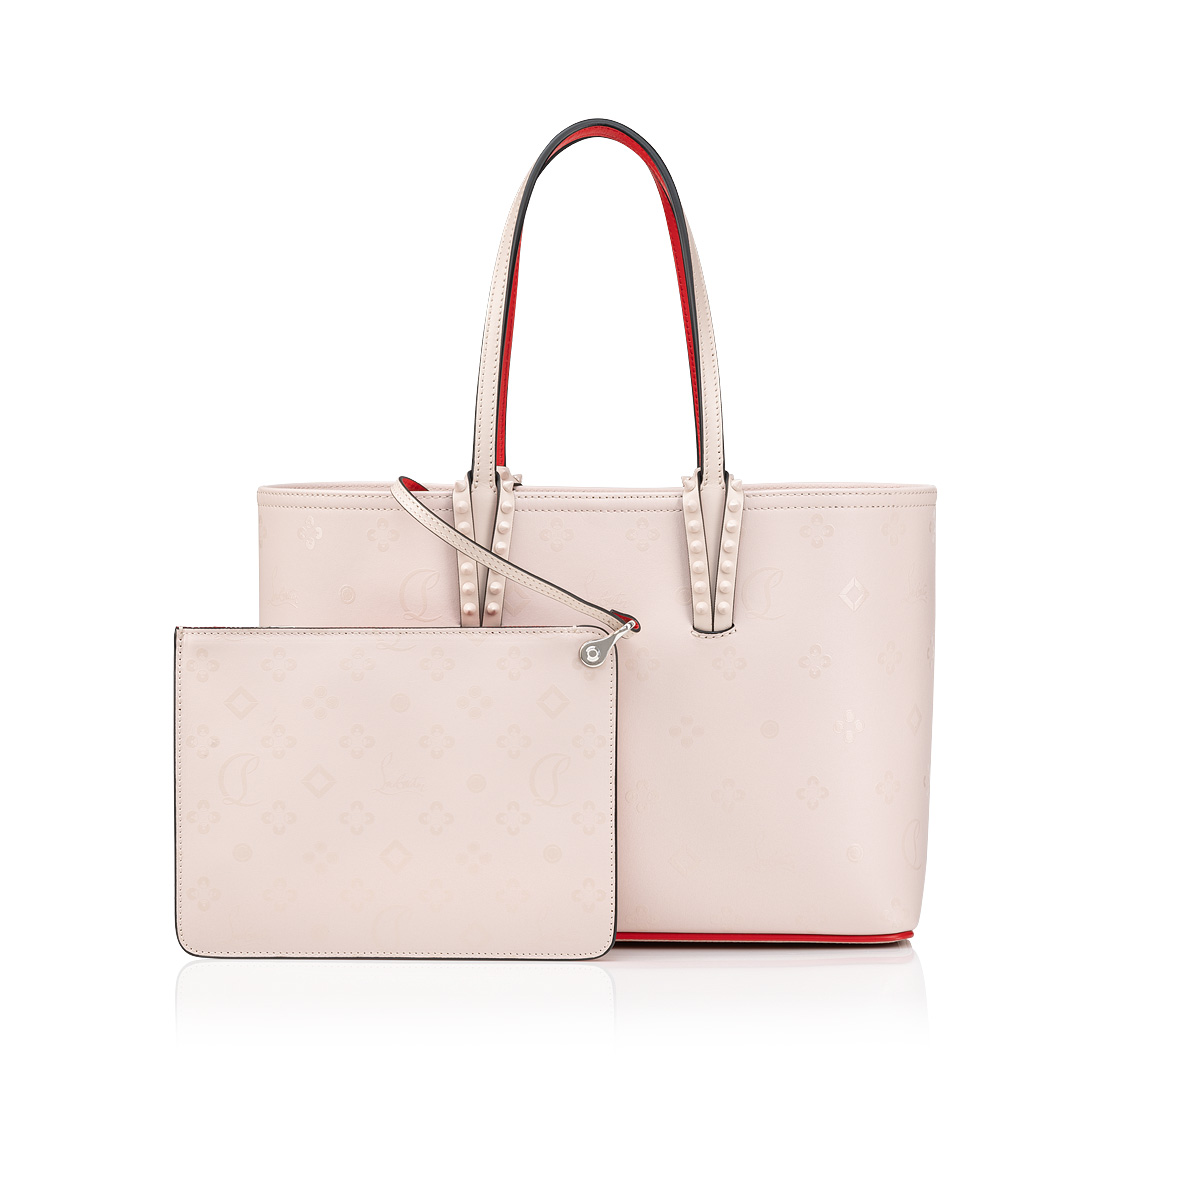 Cabata - Tote bag - Grained calf leather and spikes - Blush - Christian  Louboutin